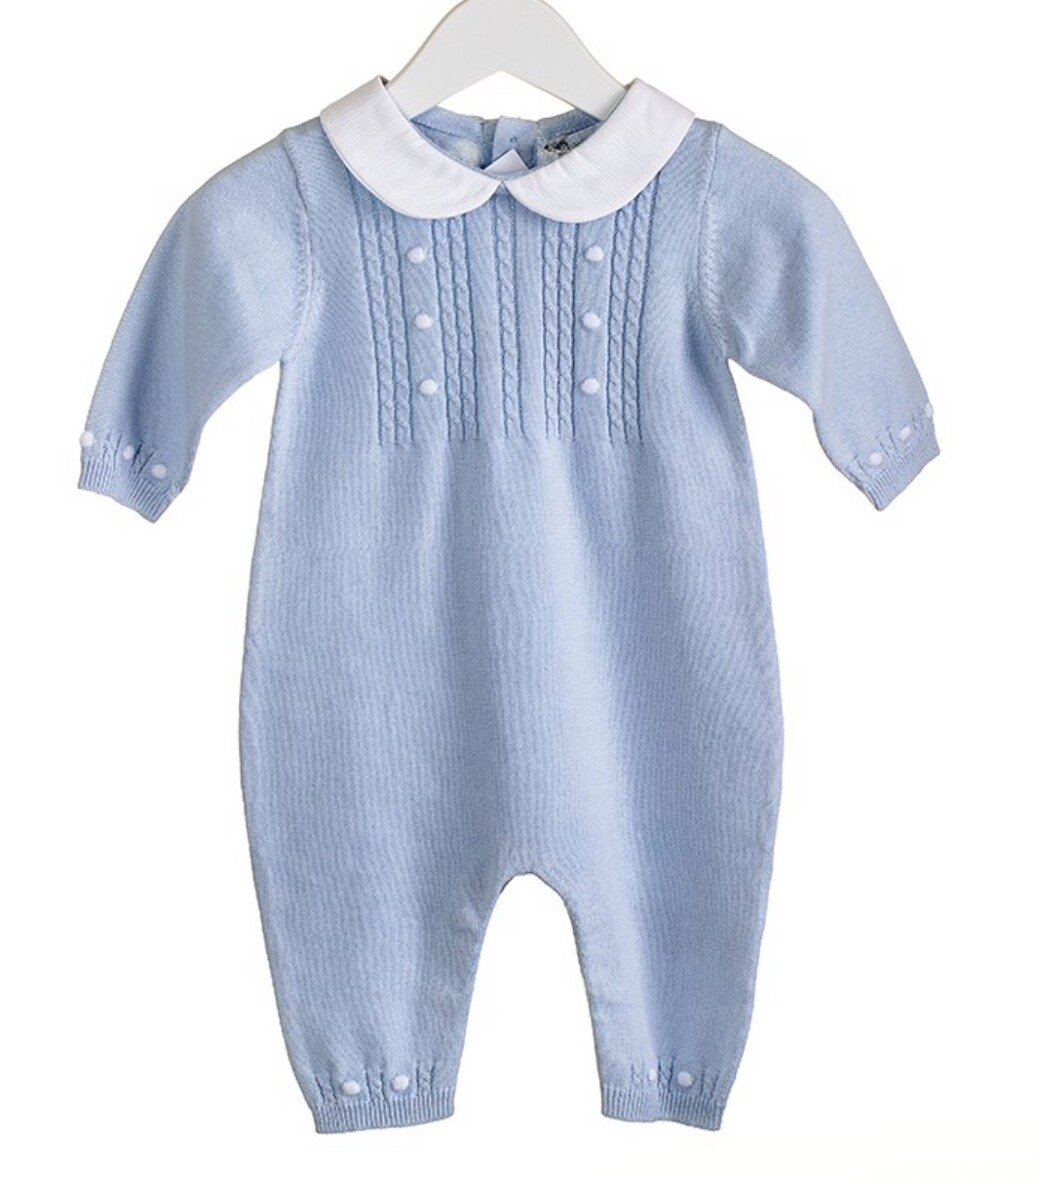 100% Cotton Knitted Blue Romper with Peter Pan collar